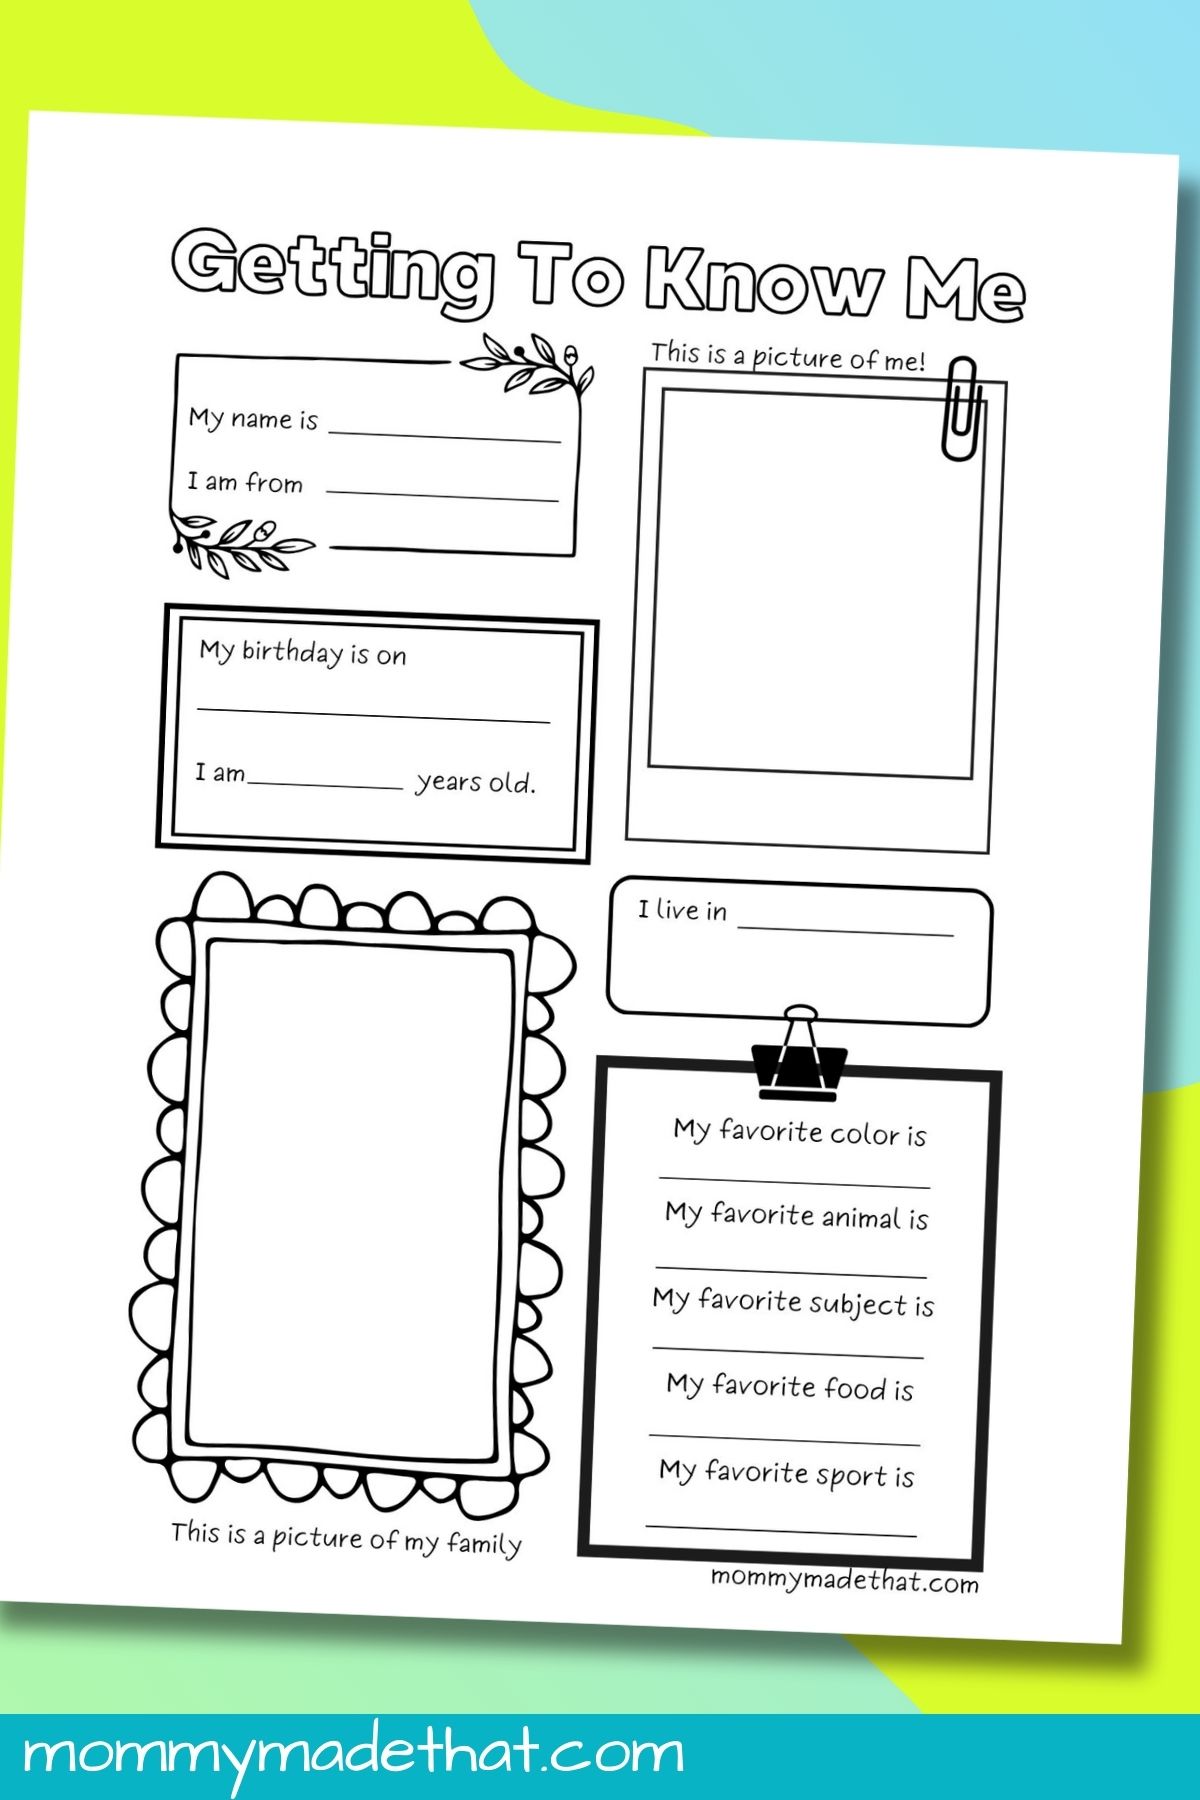 All about me worksheets.